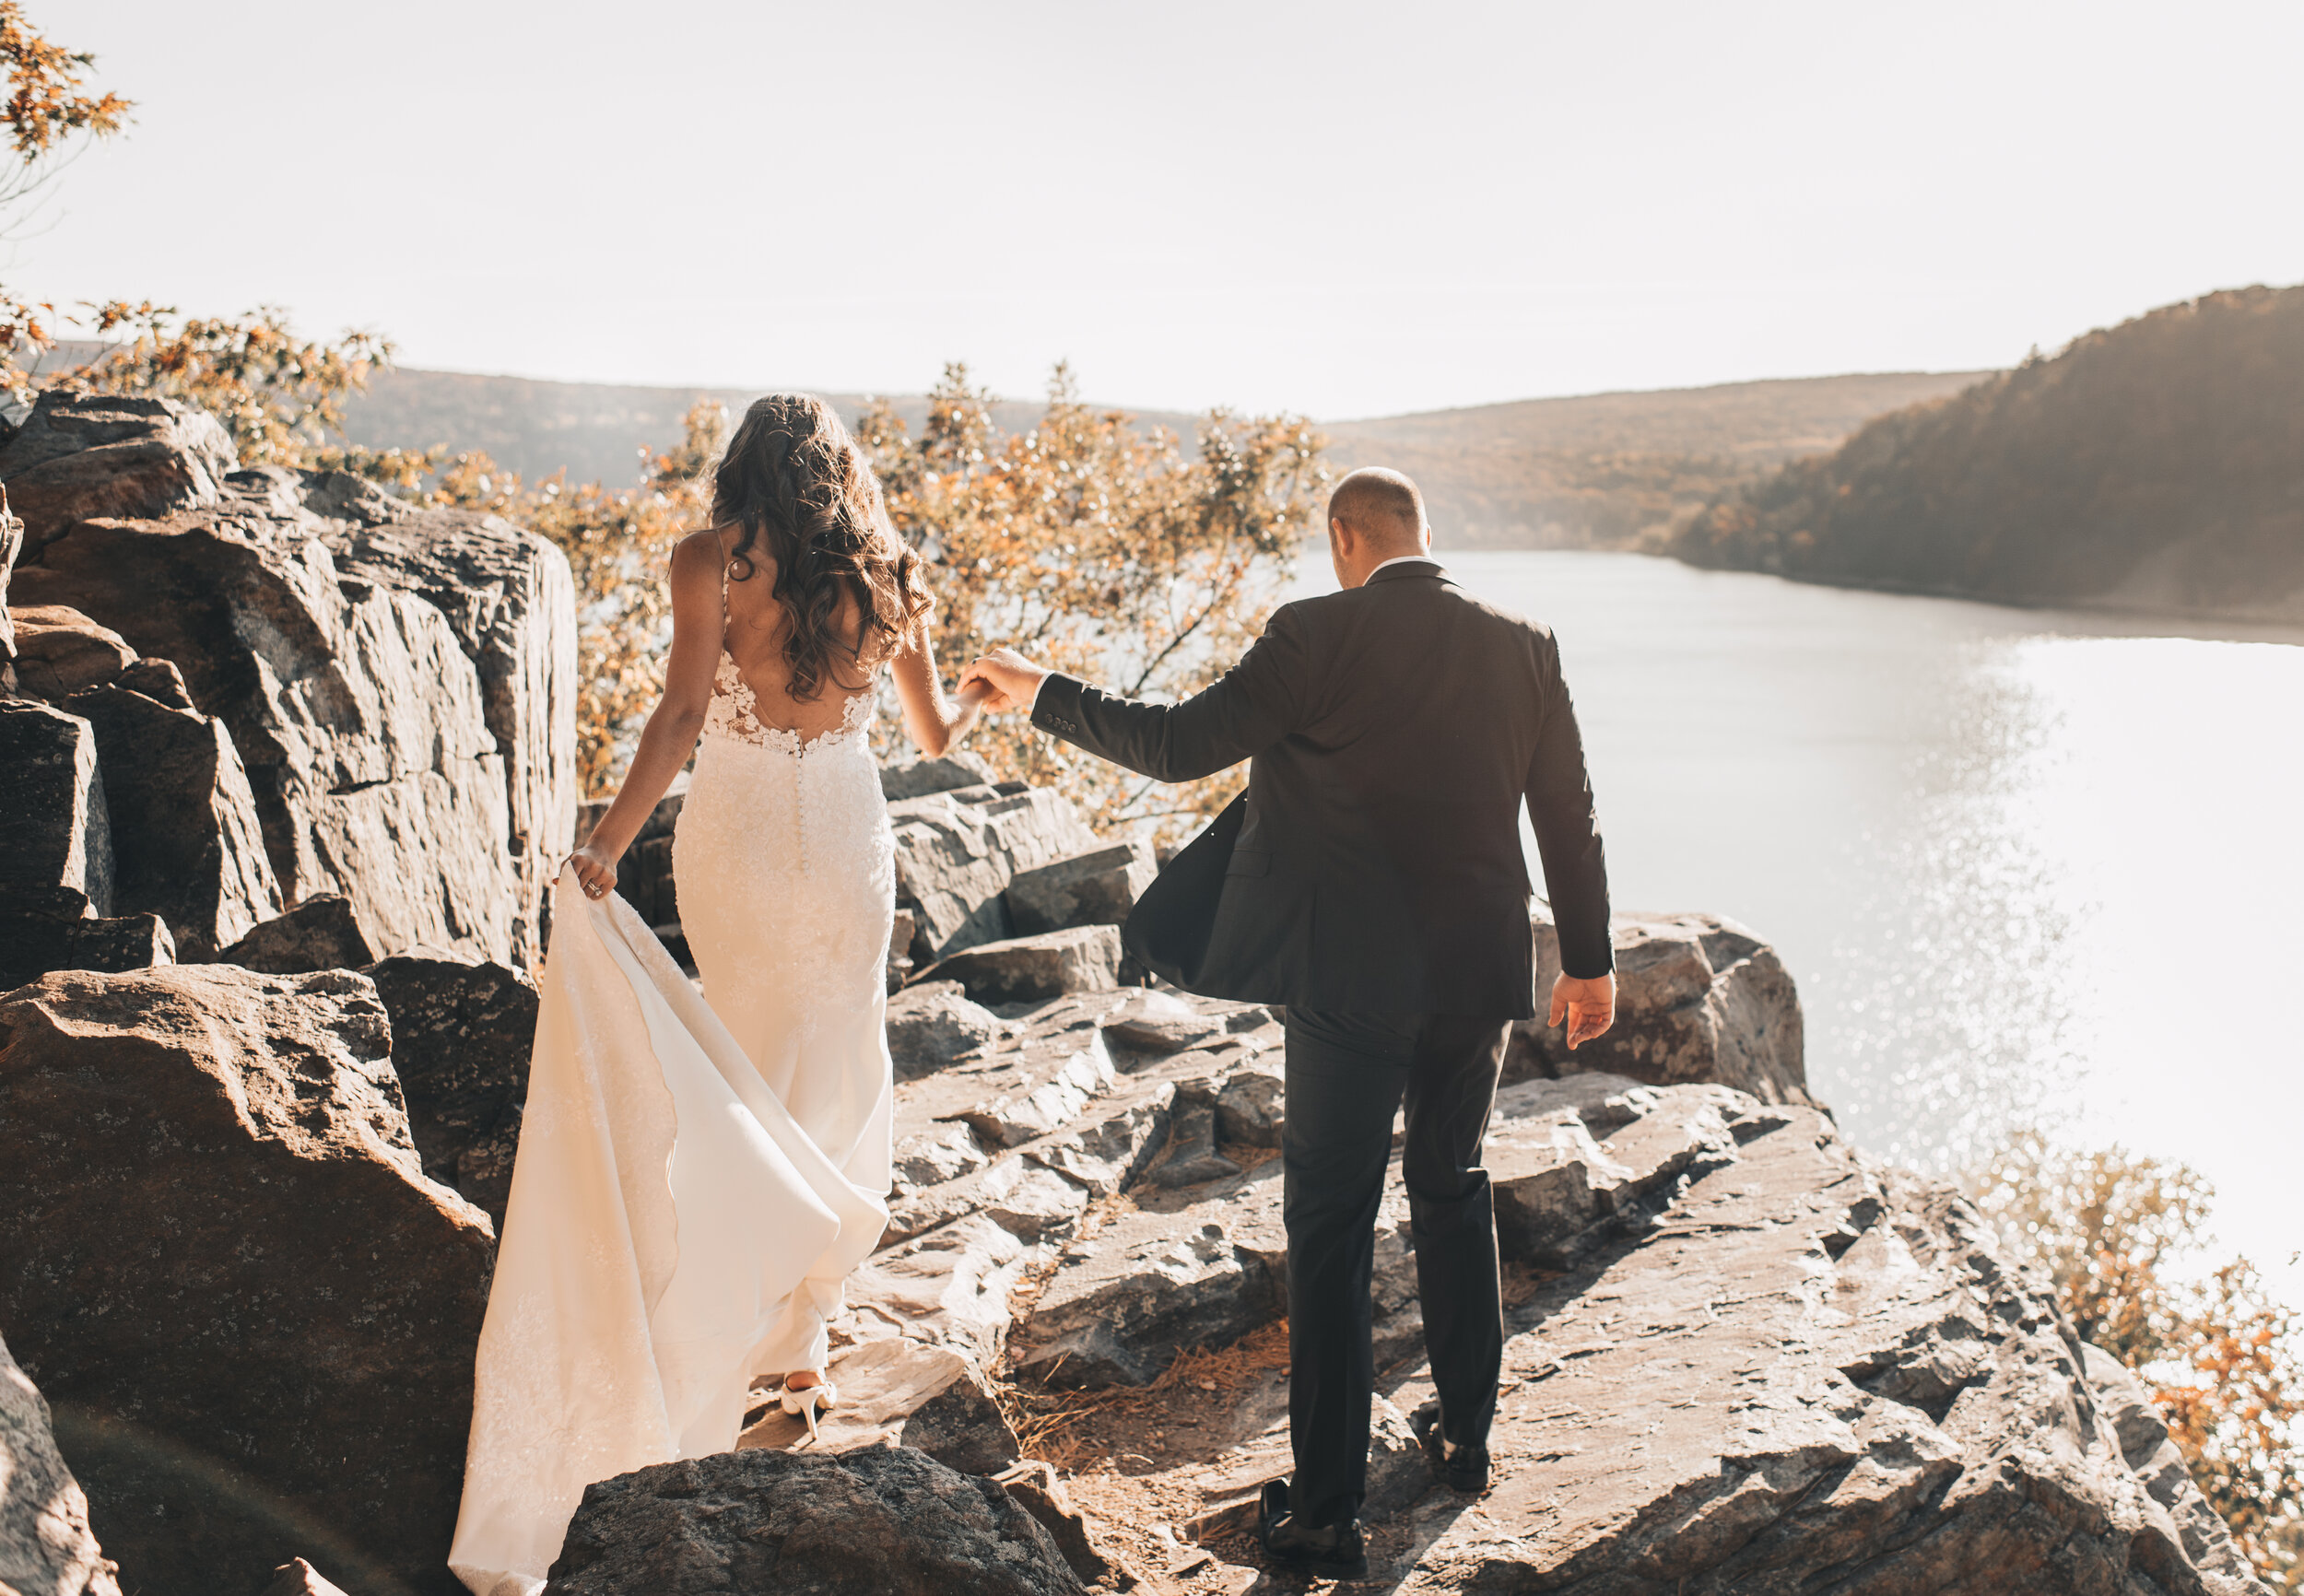 Devils Lake State Park Wedding, Devils Lake State Park Elopement, Baraboo Wisconsin Wedding, Bride and Groom Beach Photos, Bride and Groom Mountain Photos, Midwest Adventurous Wedding